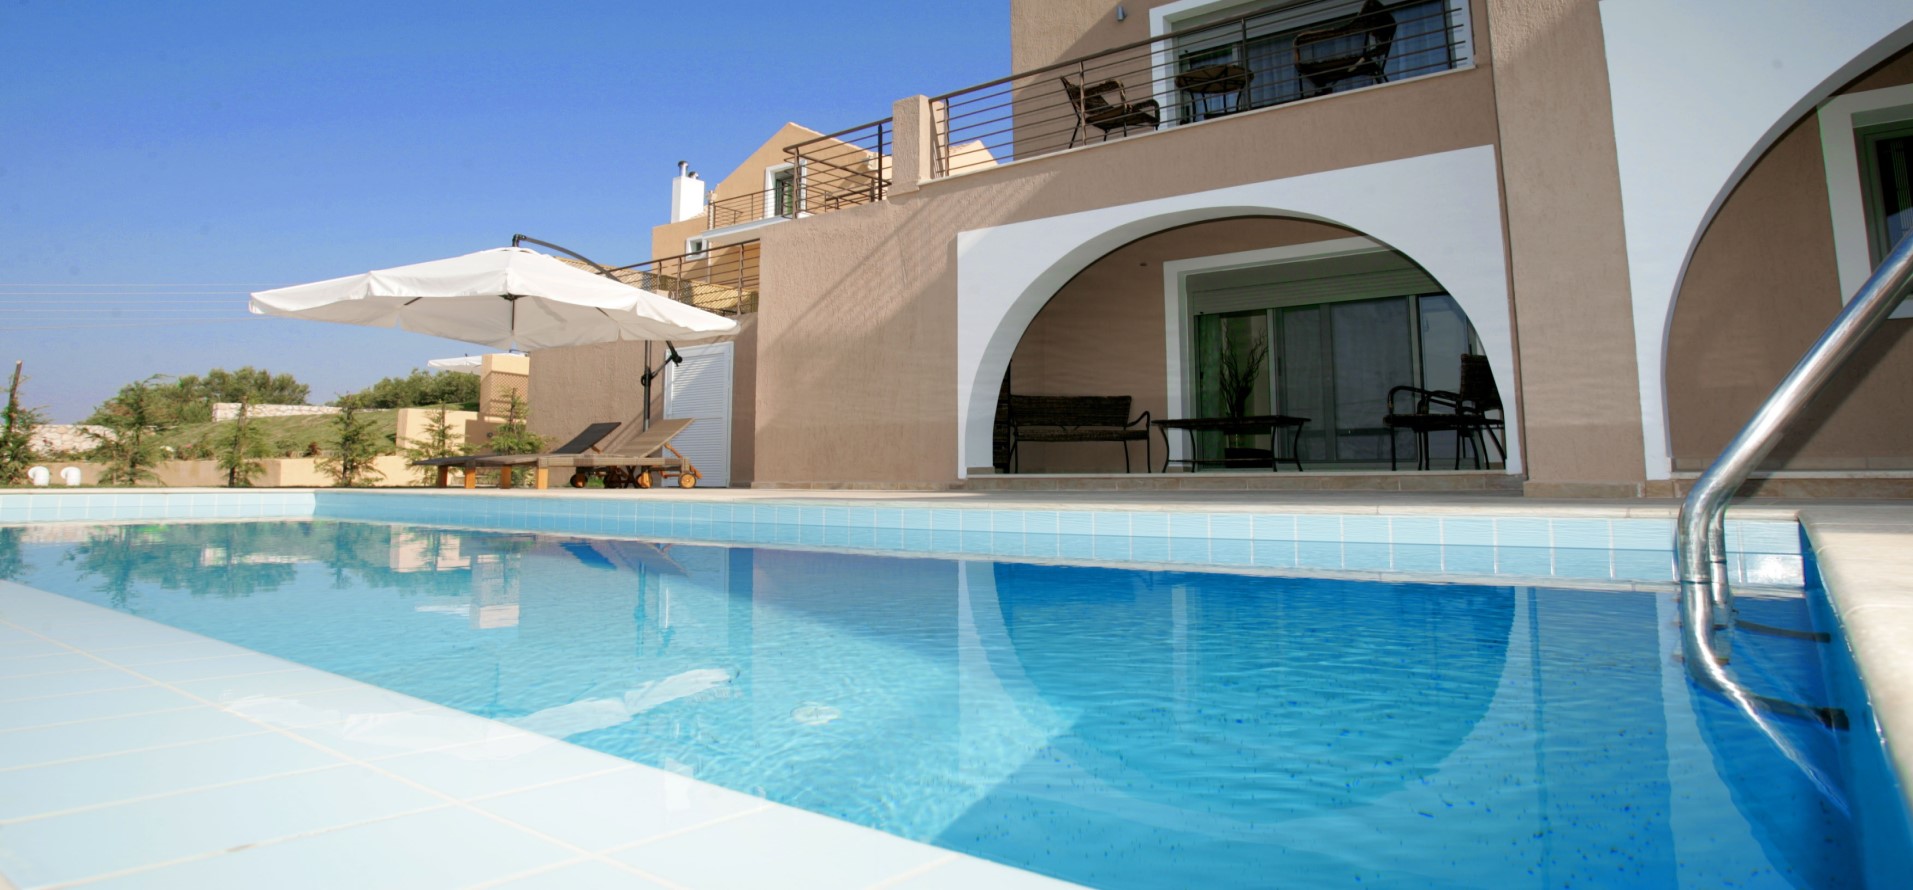 2 people villa with private pool image